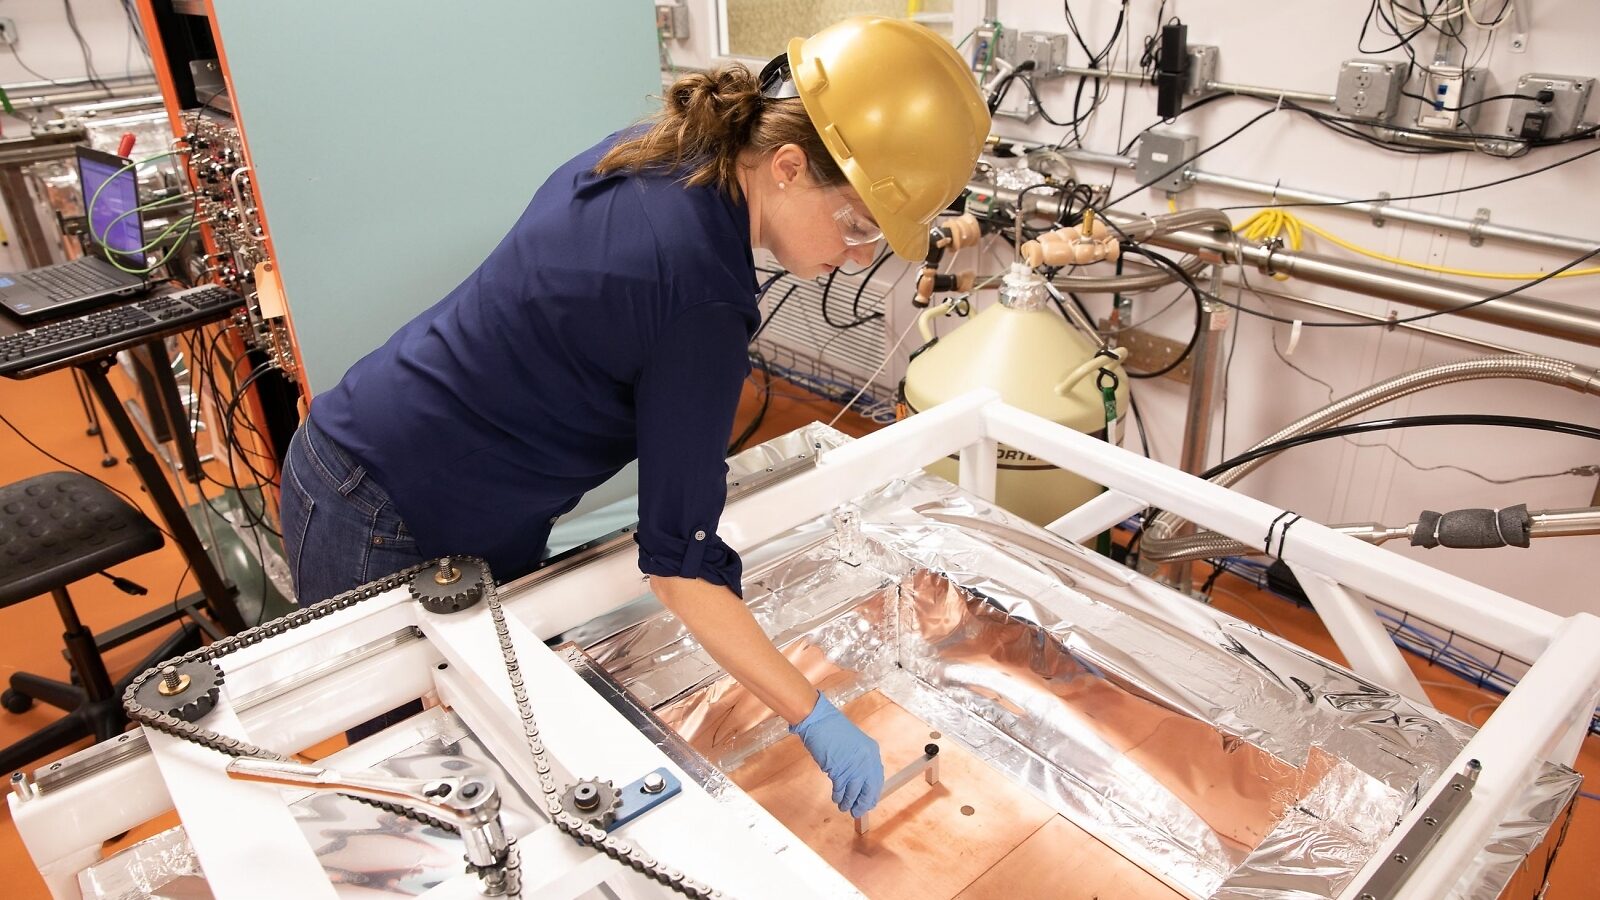 Brianna Mount, assistant professor of physics at Black Hills State University, at work.